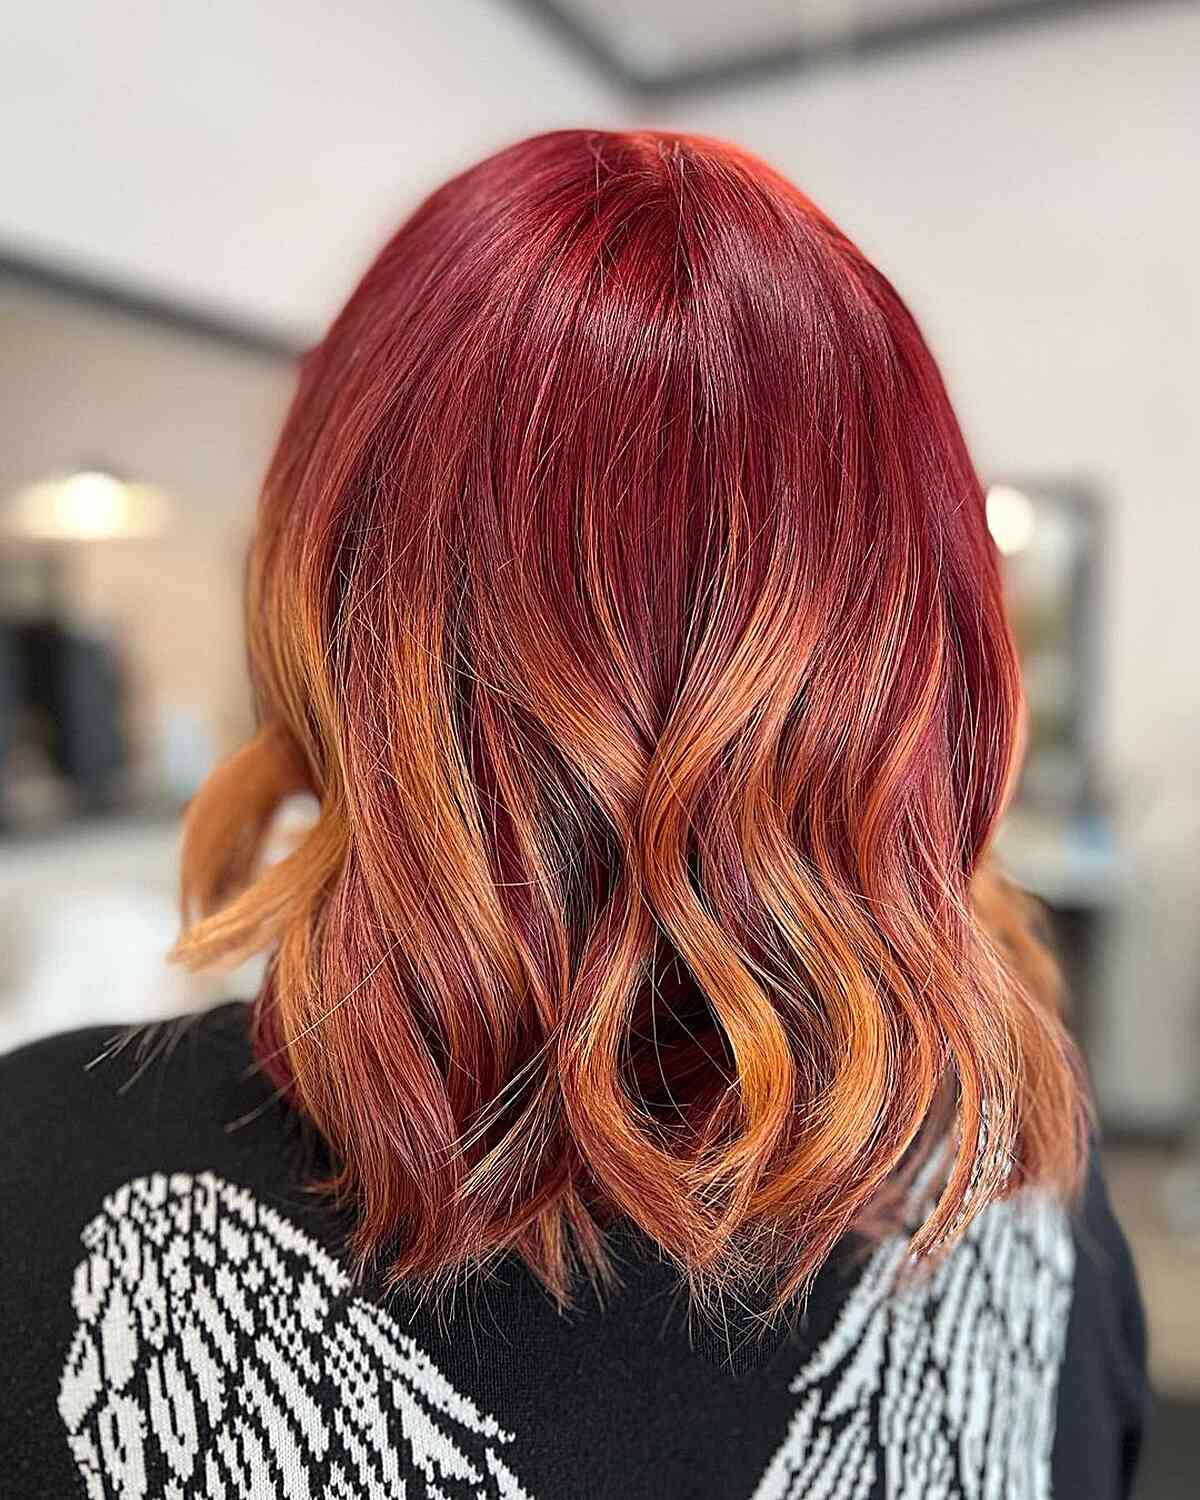 Fall-Inspired Red and Brown Ombre on a Short Bob